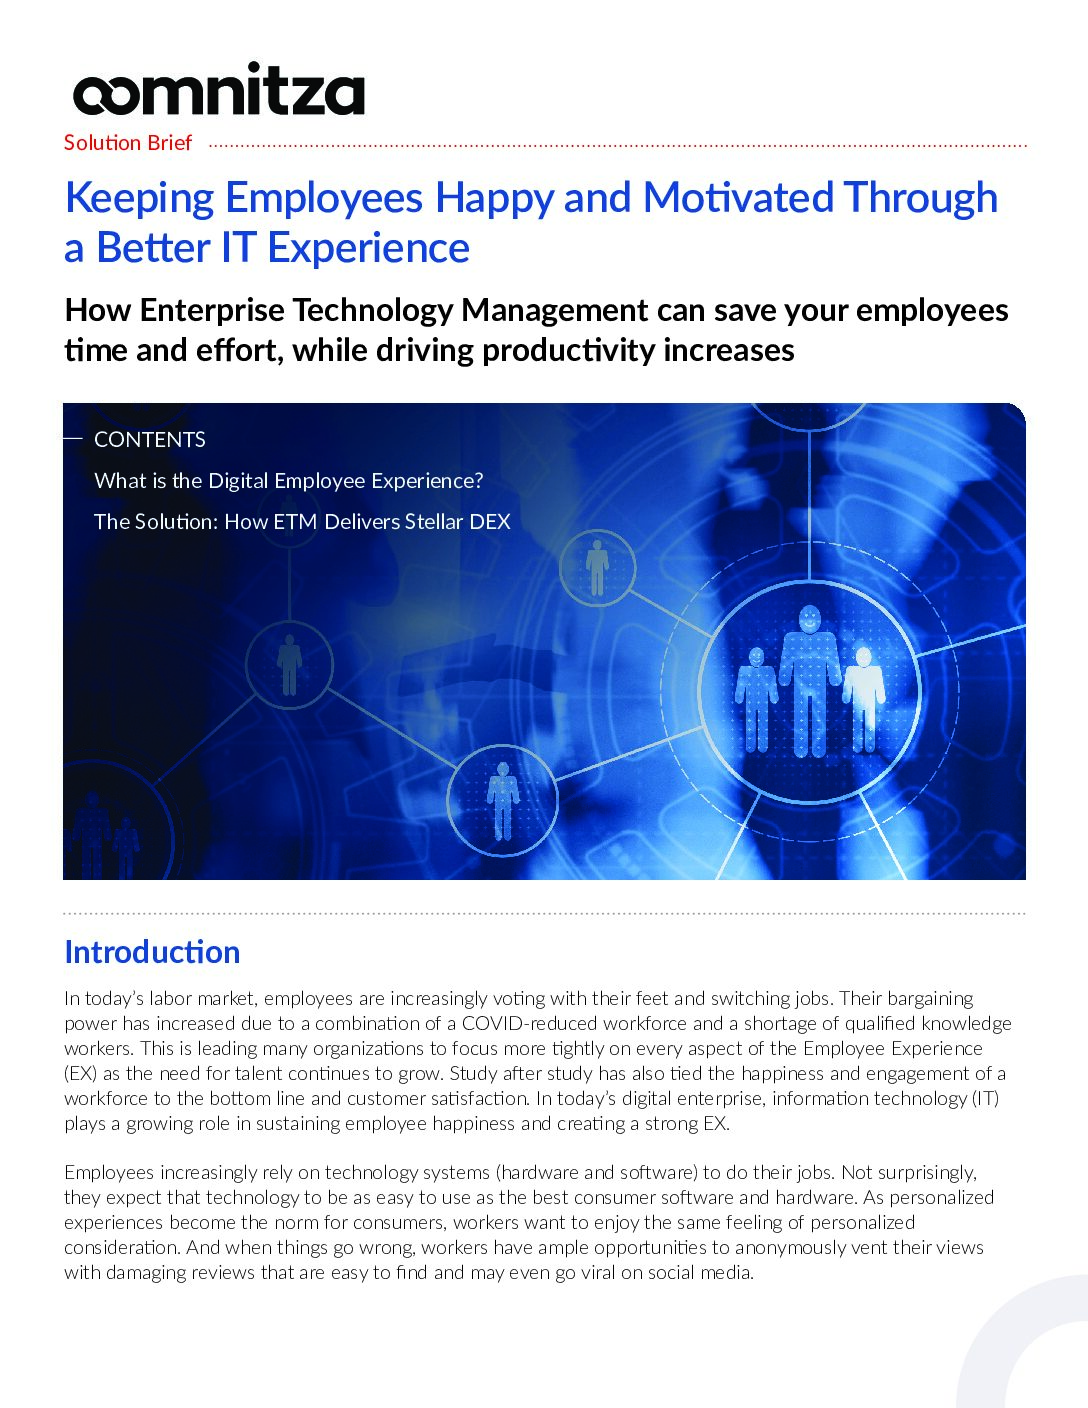 Featured image for Keeping Employees Happy and Motivated Through a Better IT Experience